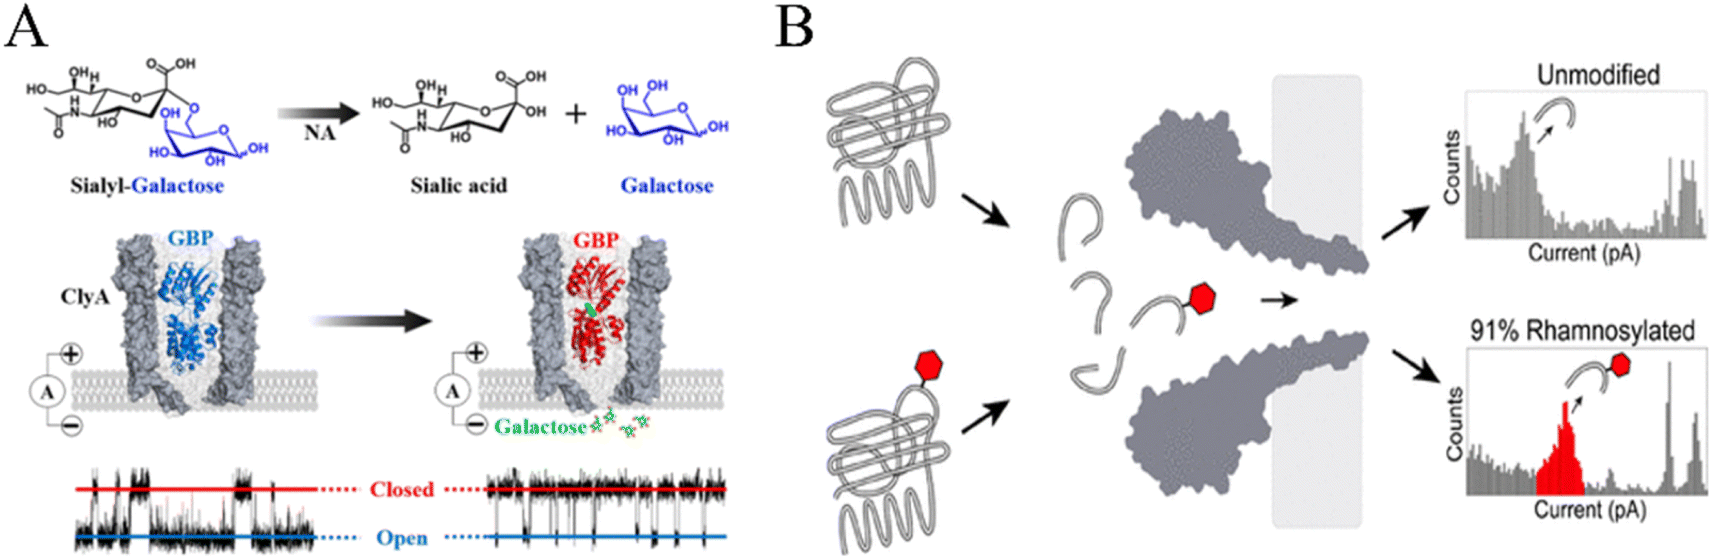 Recent advances in nanopore-based analysis for carbohydrates and 